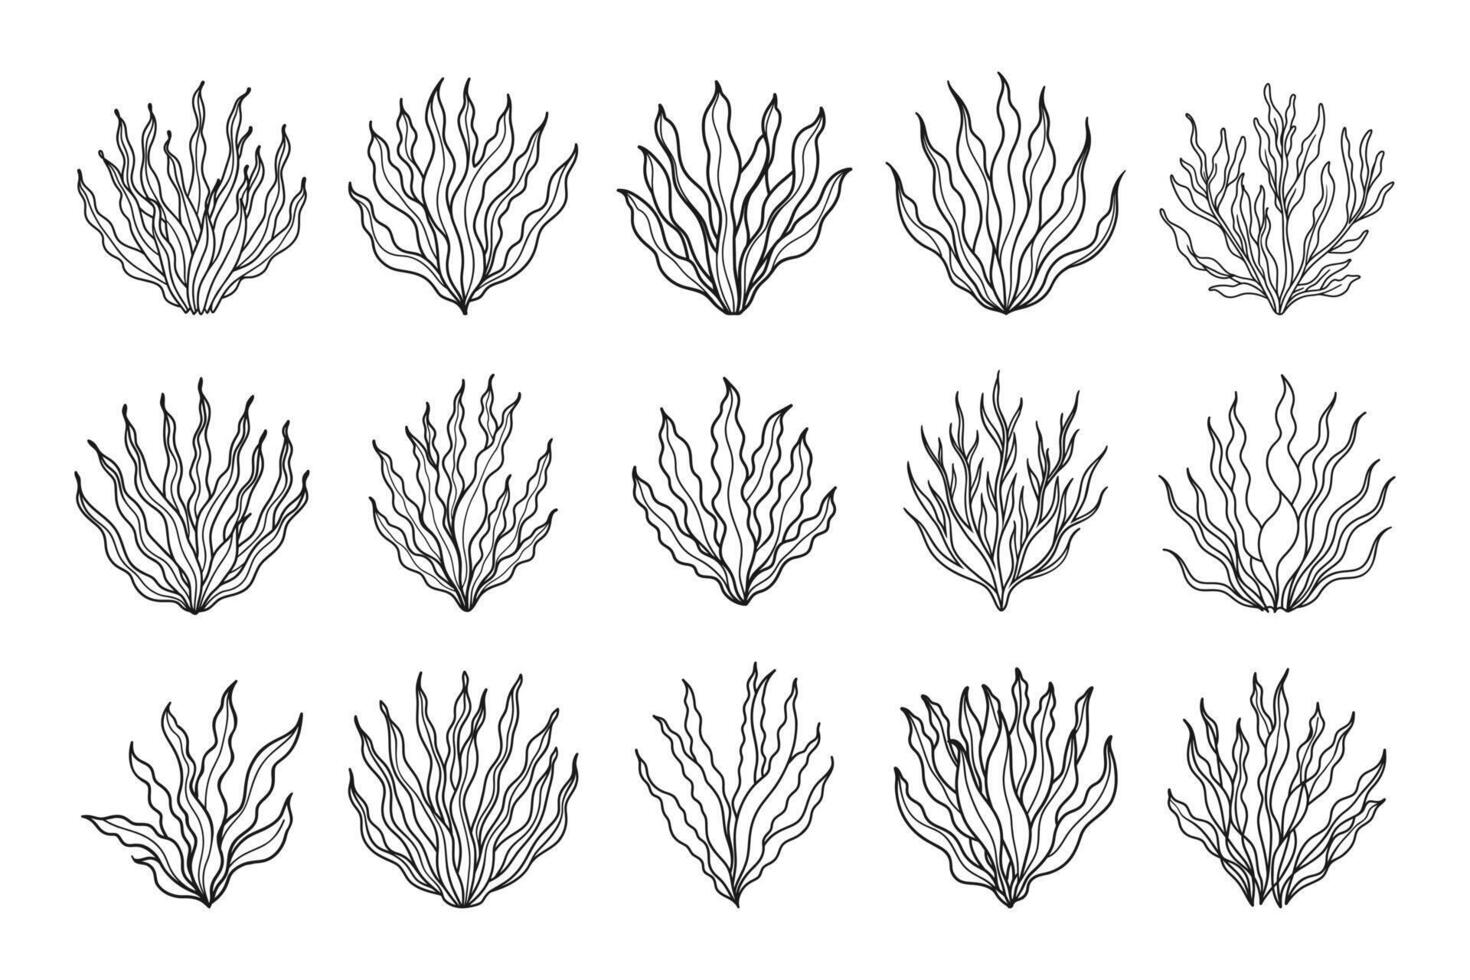 Set of algae or coral reefs. Collection of underwater plants. Set of seaweed icons. Sketch, illustration. Vector